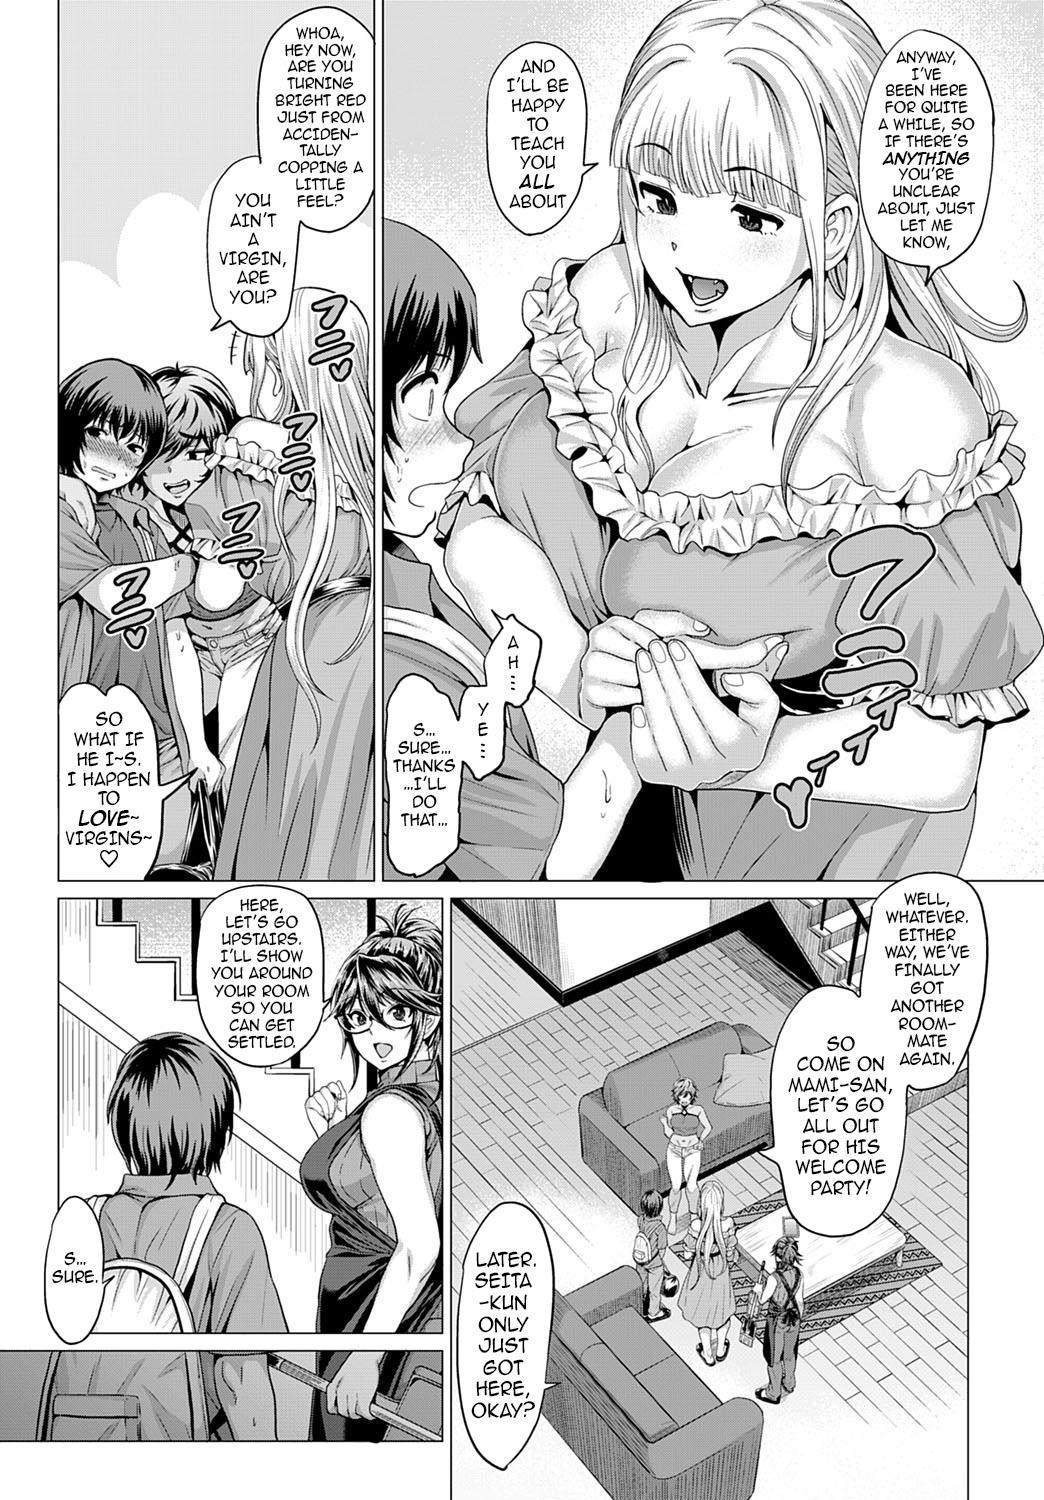 Succubus Share House e Youkoso! | Welcome to the Succubus Shared House! 2